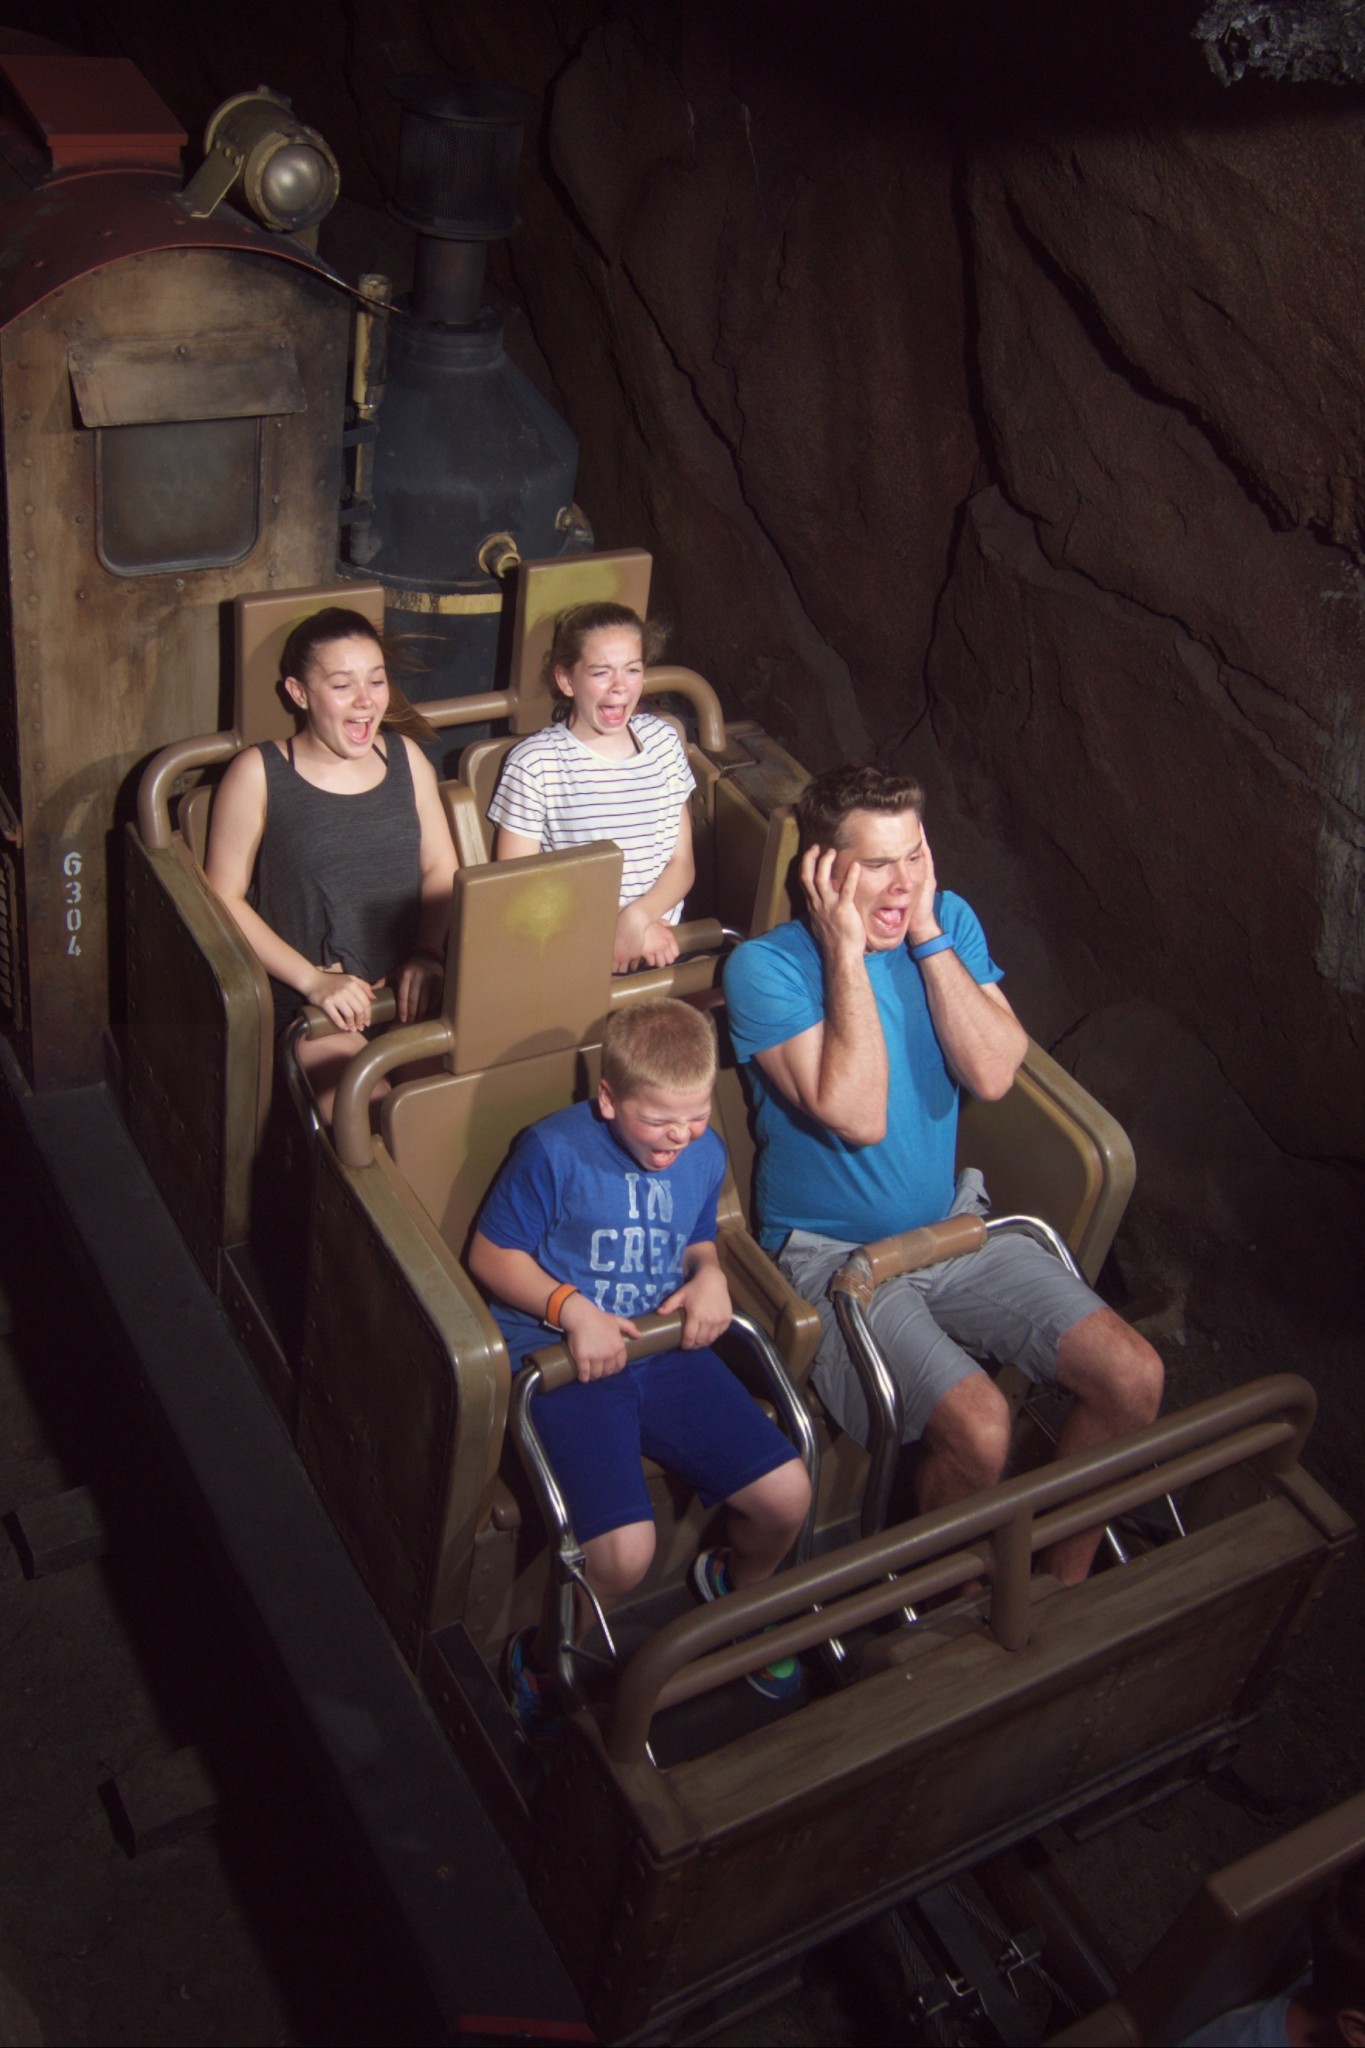 Top Ride Tips at Disney World… the inside track.